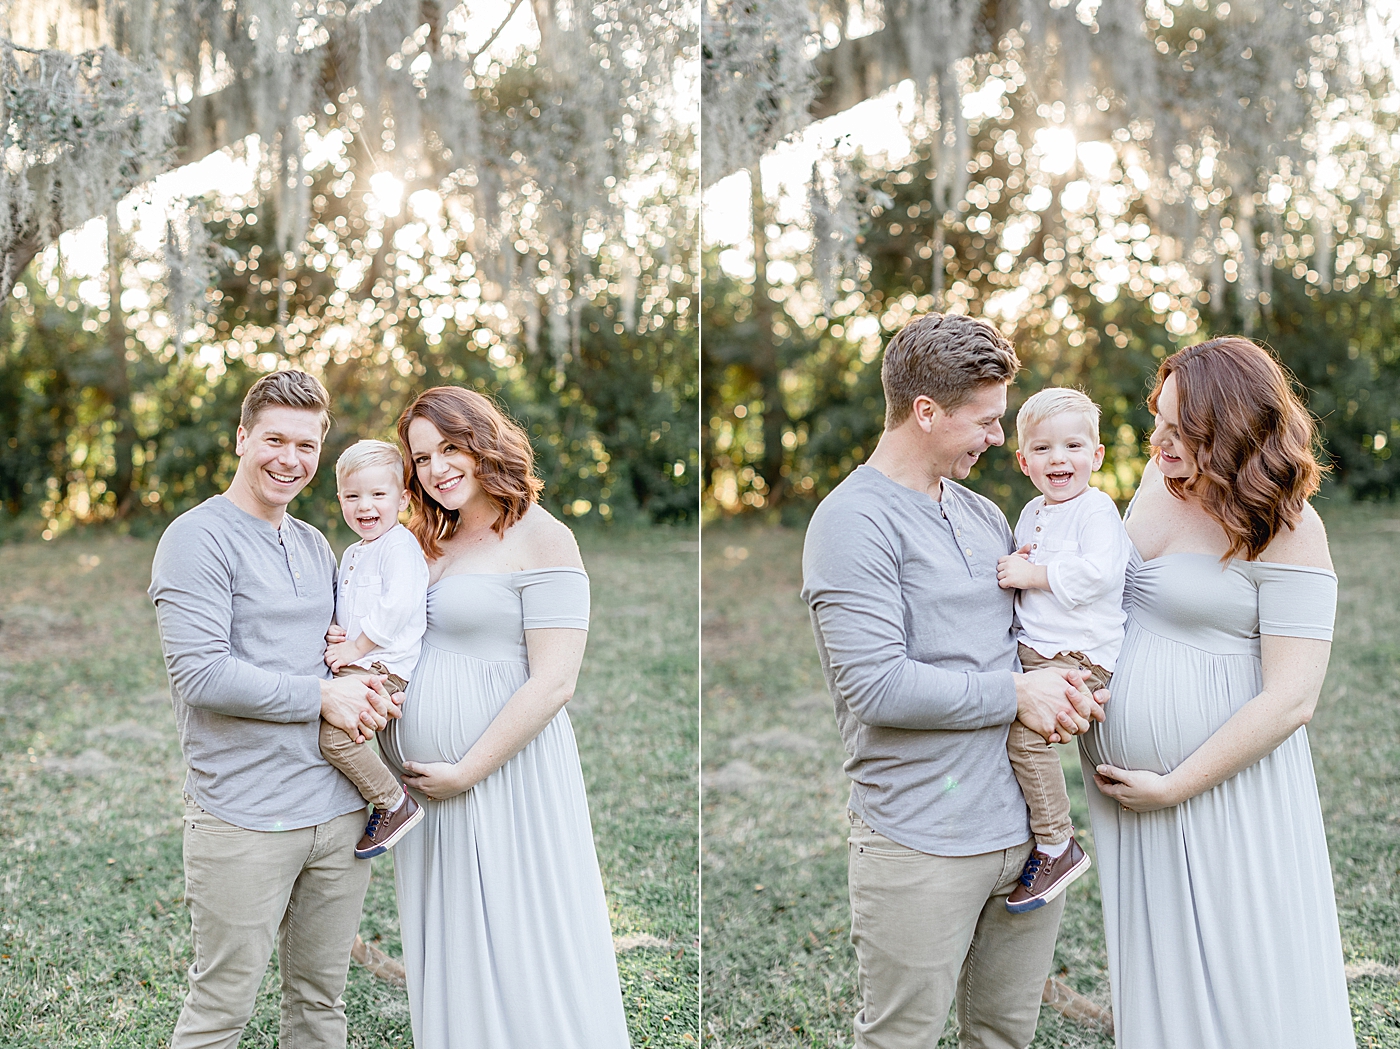 Sunset maternity session under the oaks in Tampa, FL. Photo by Brittany Elise Photography.